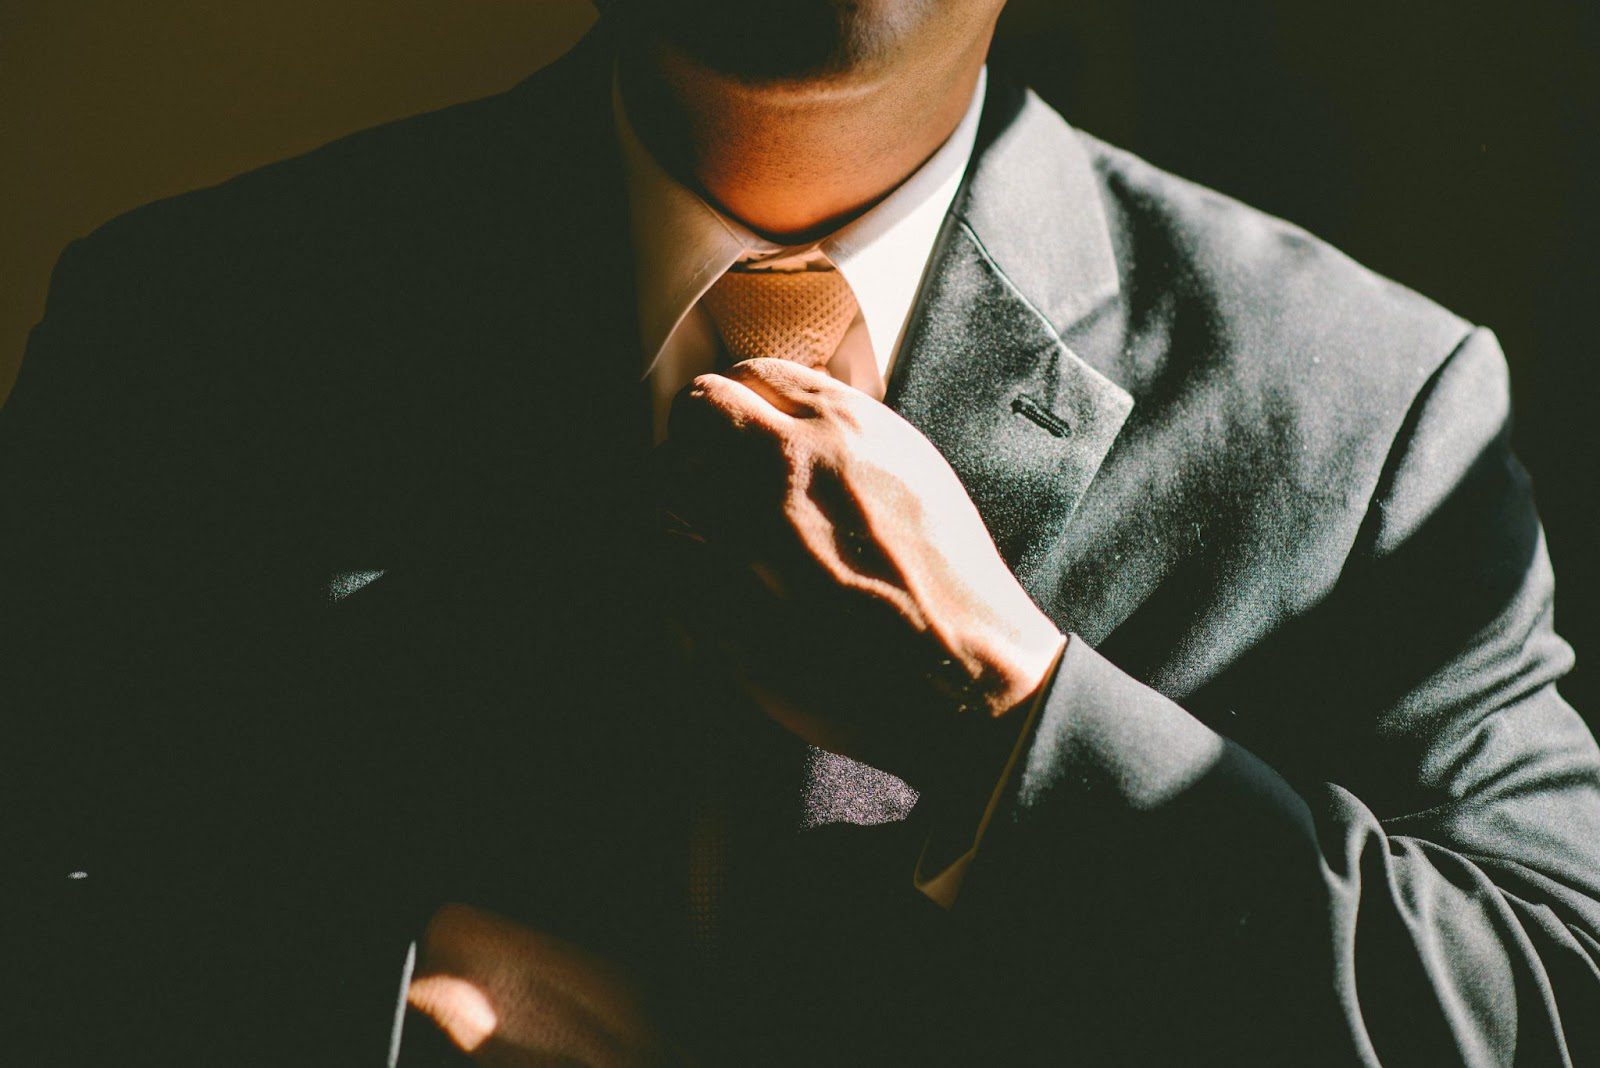 A close-up shot of a business man tightening his tie